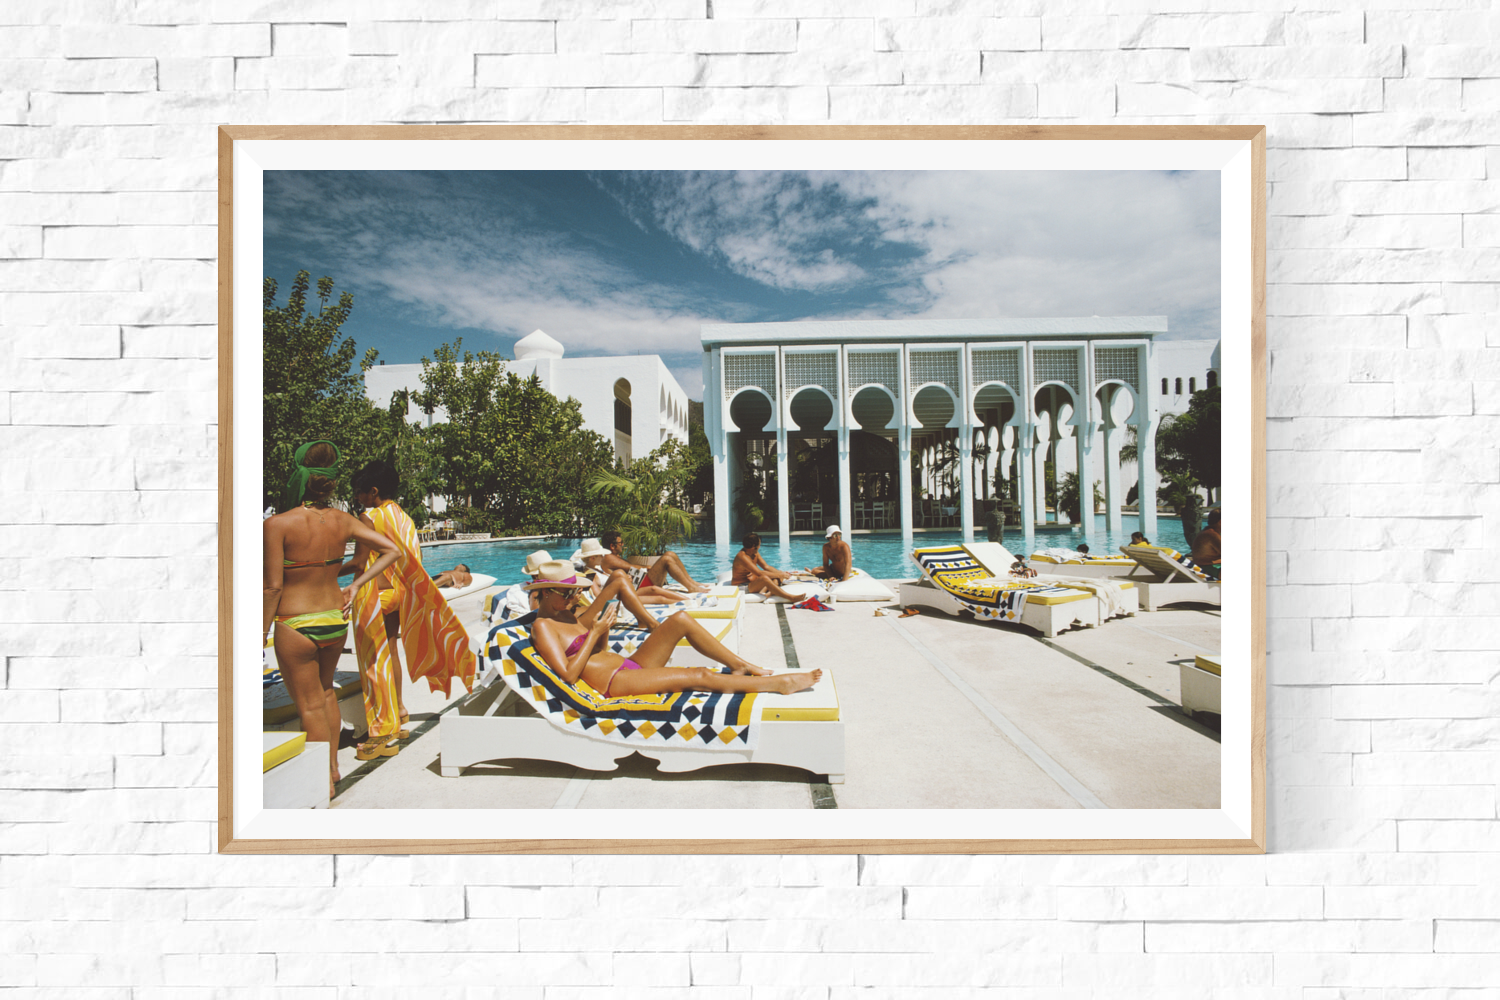 Framed: Slim Aarons: Armando's Beach Club poolside photo for sale Getty Images Gallery